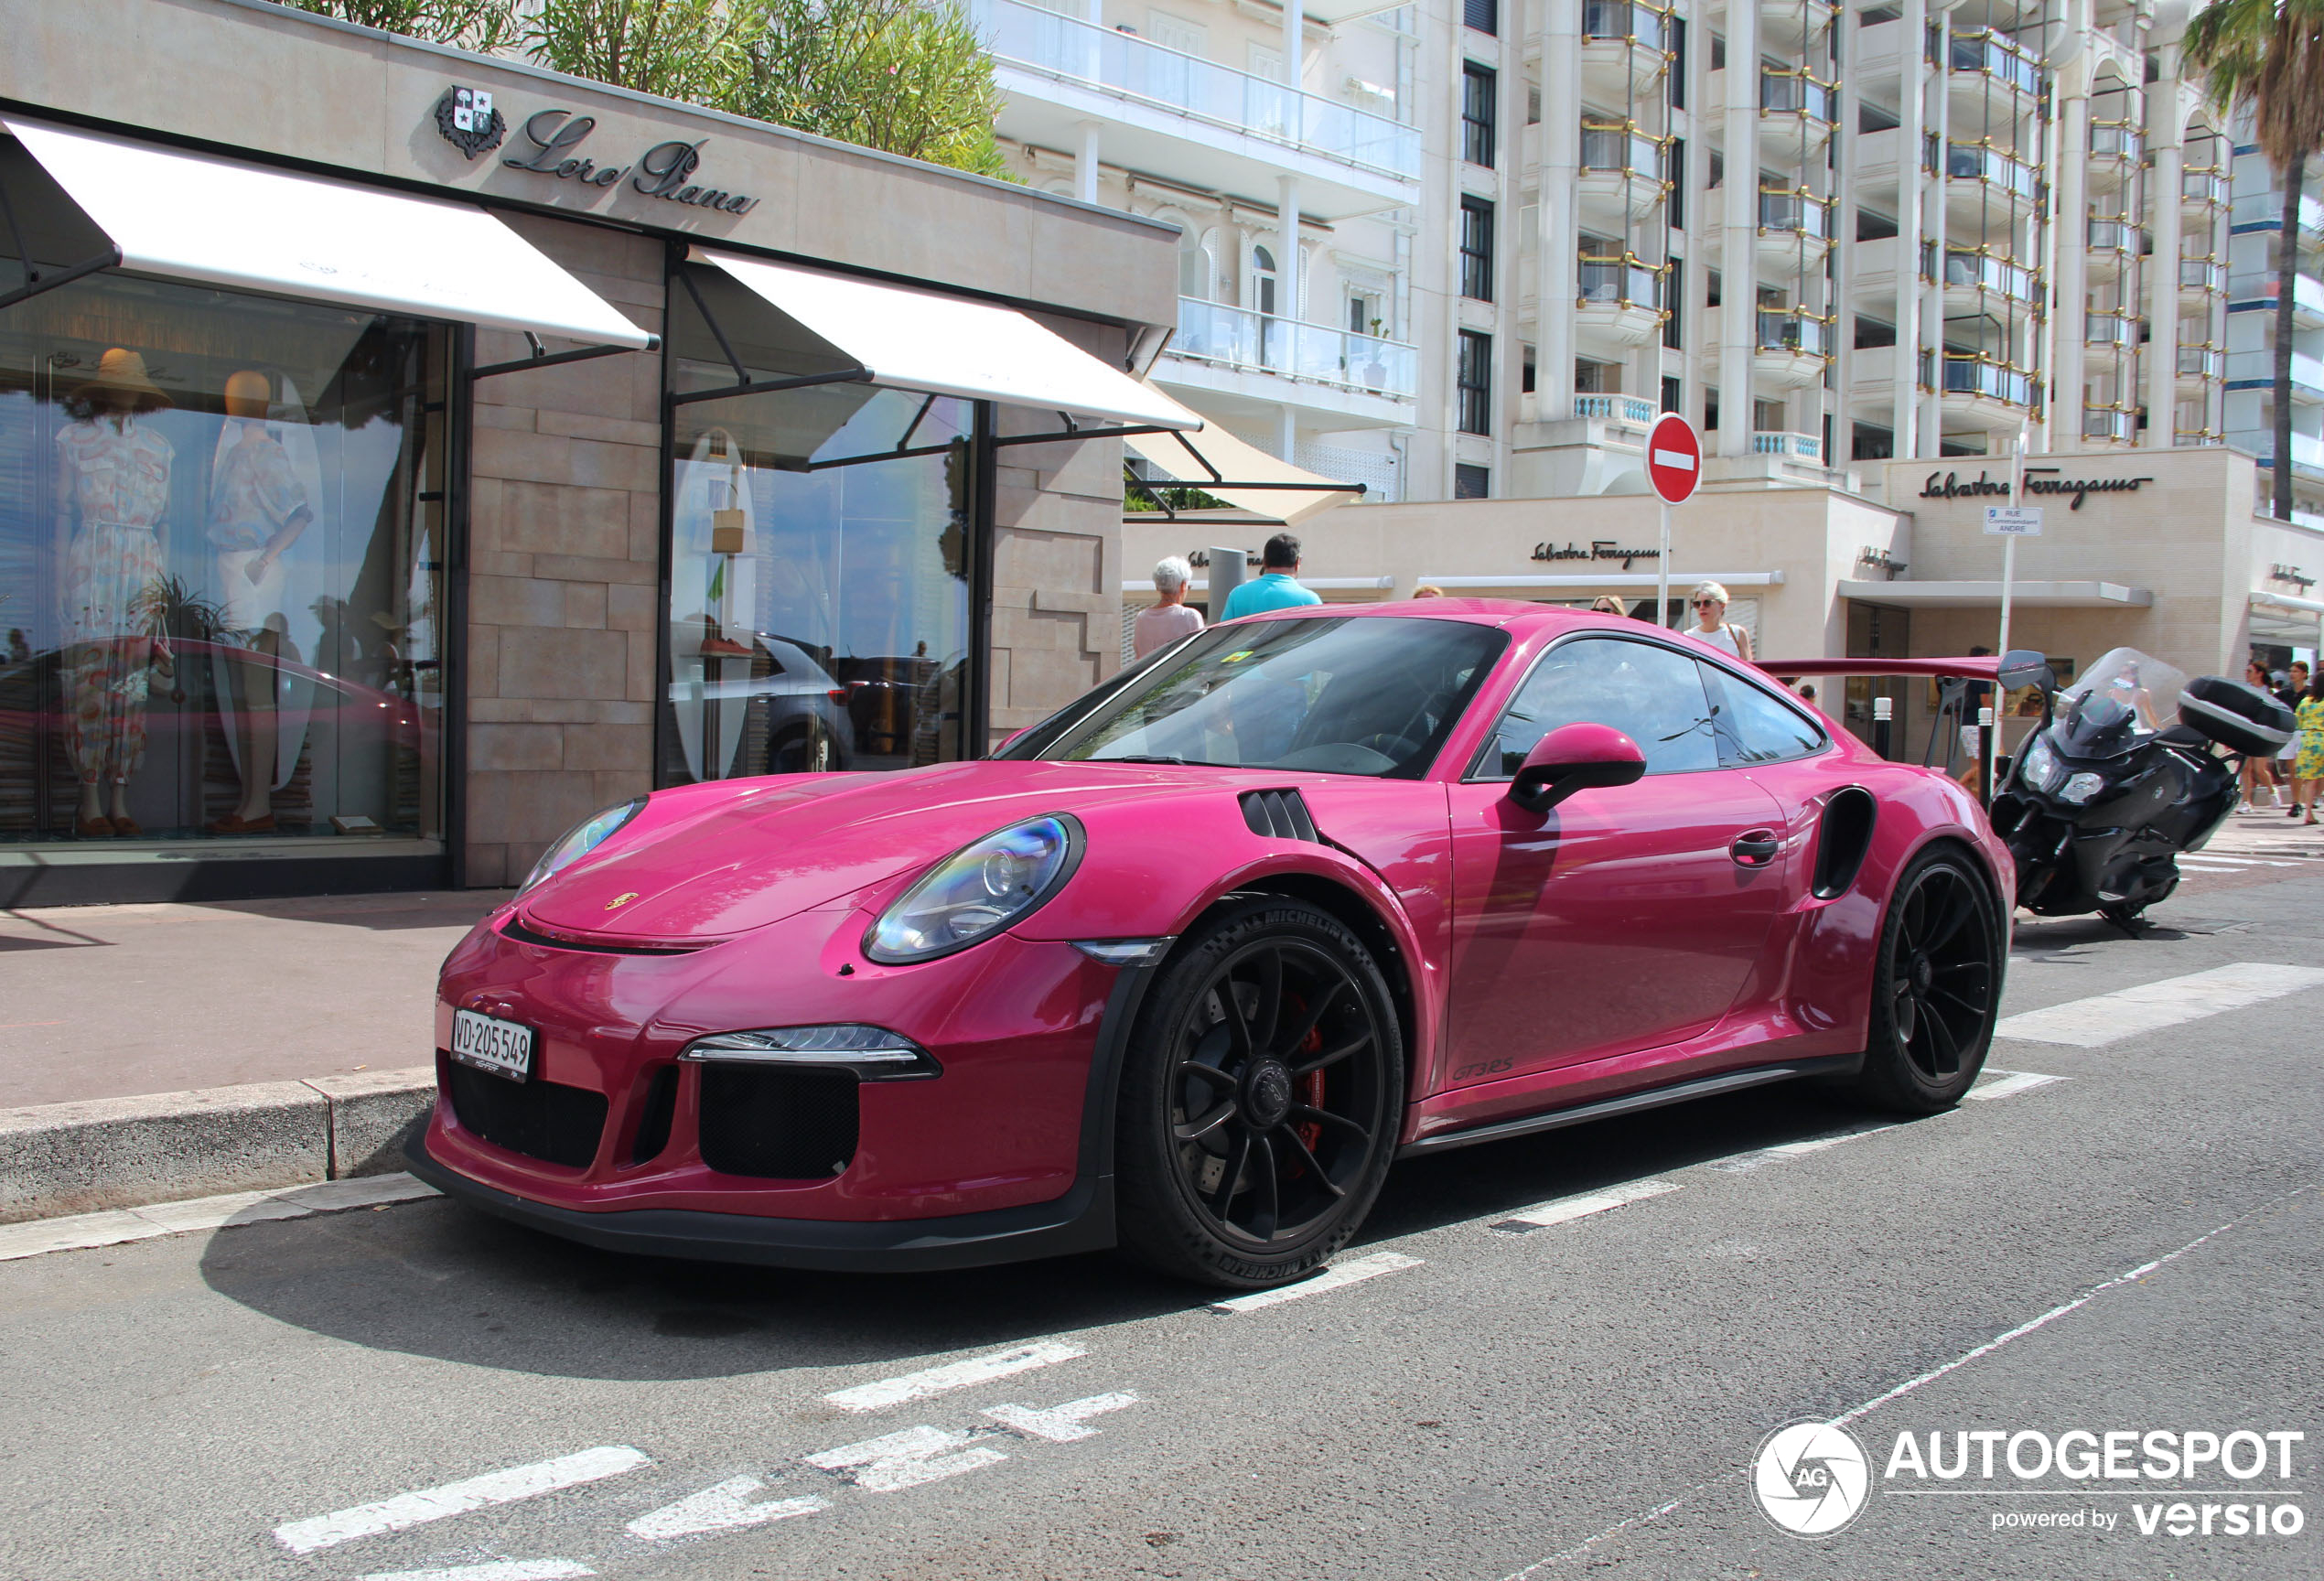 The glowing Rubystar looks pretty coolon the GT3RS